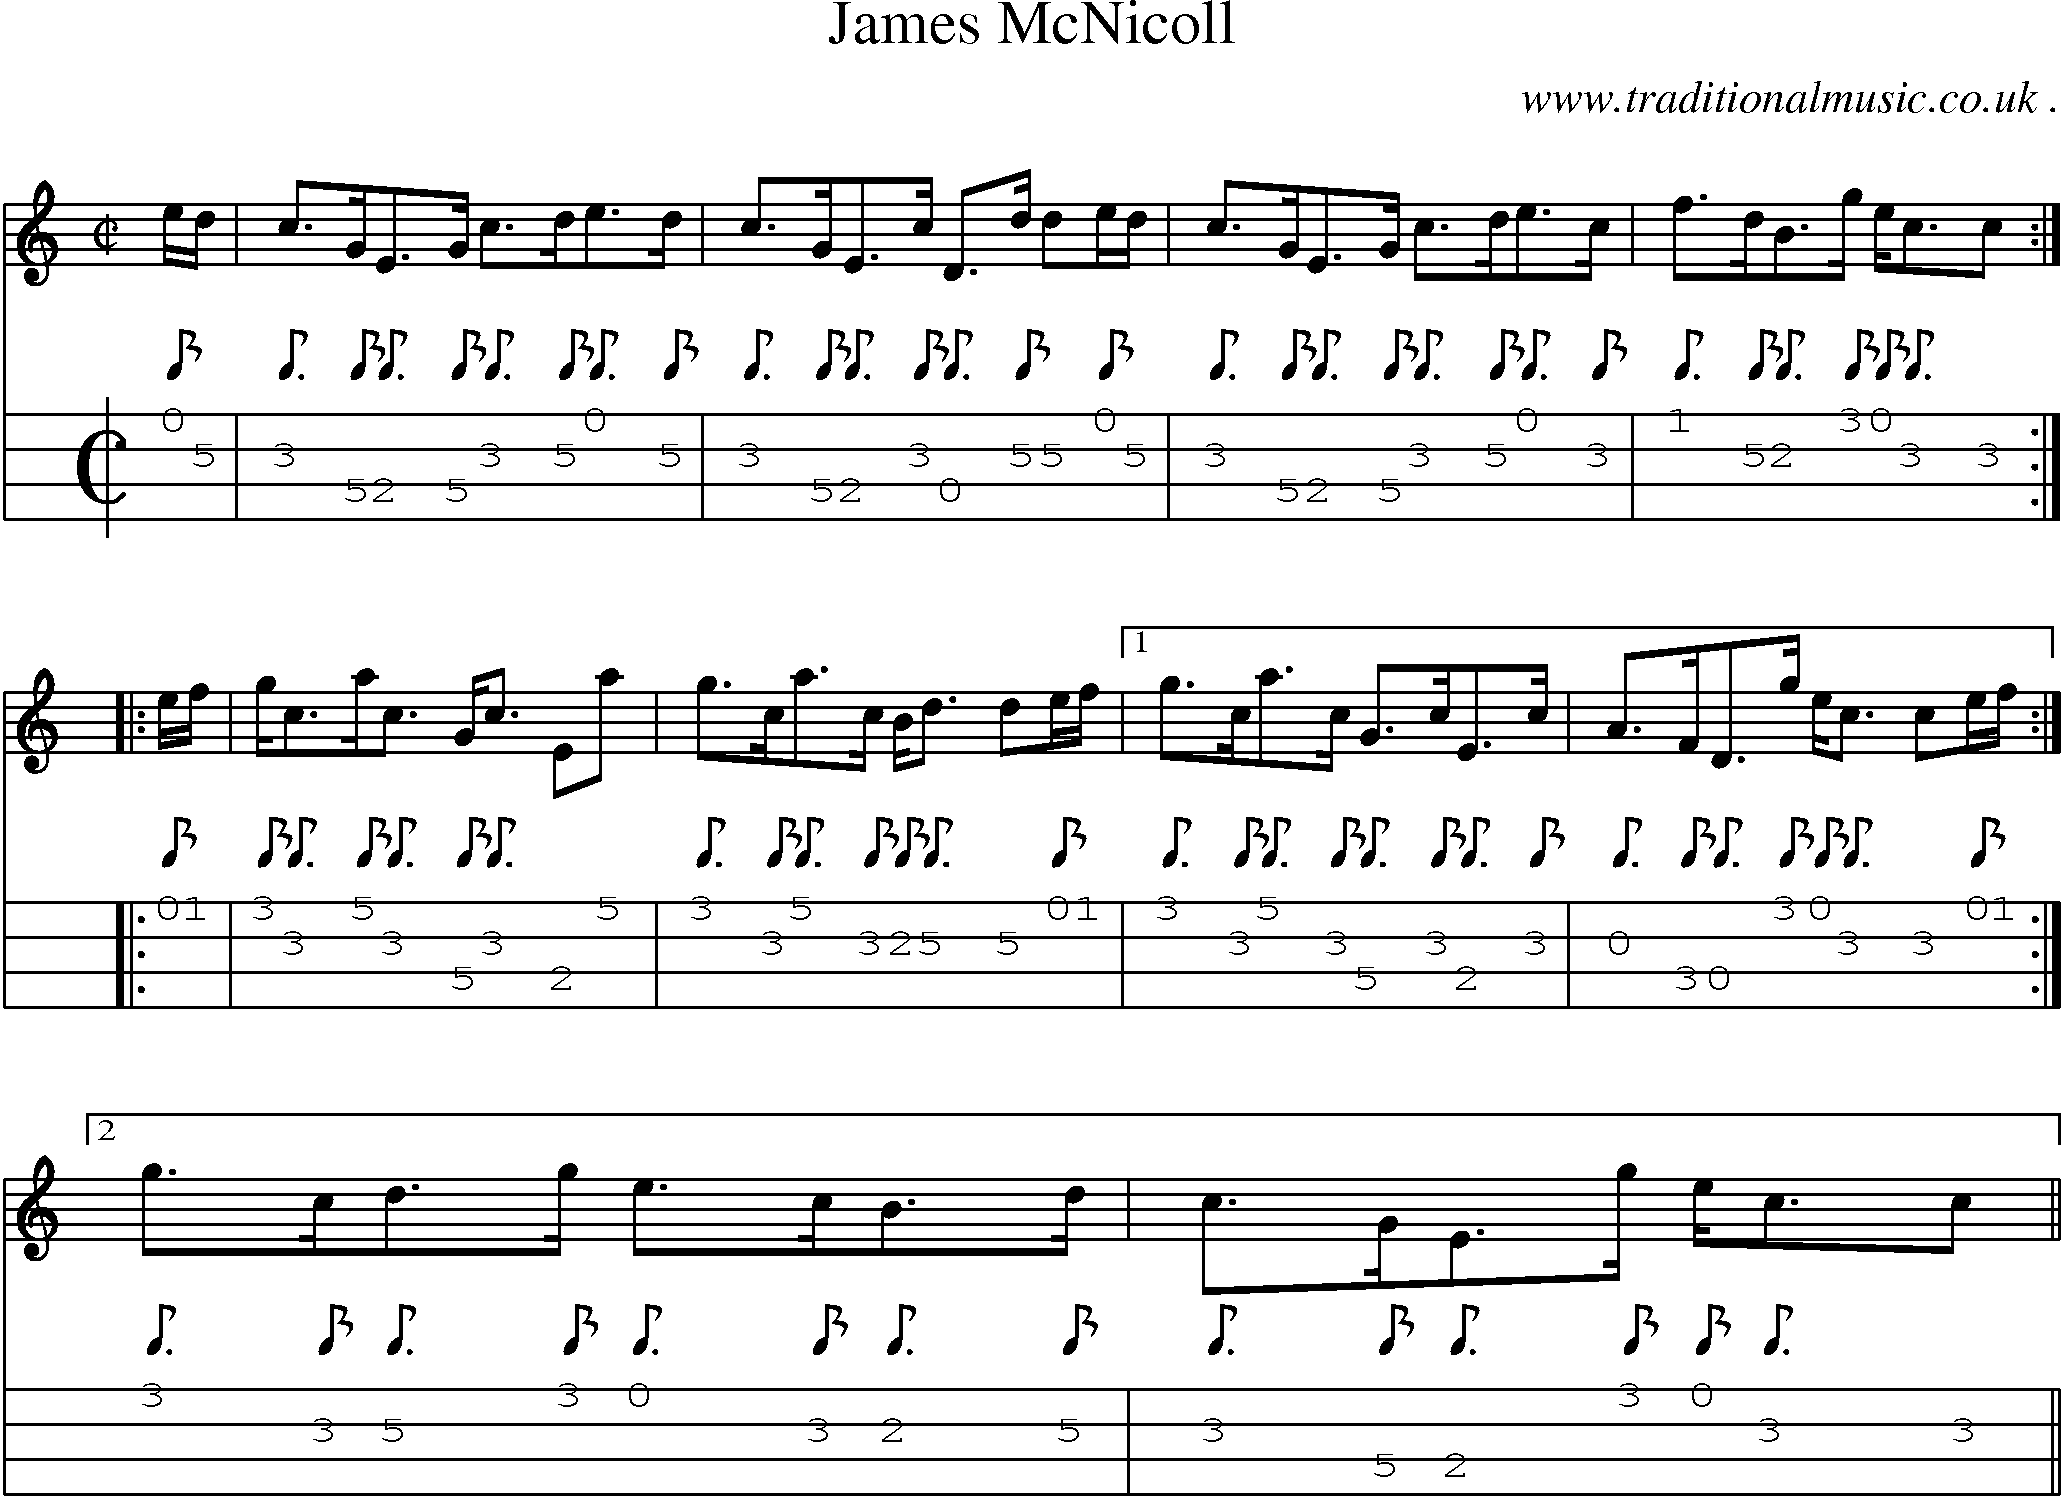 Sheet-music  score, Chords and Mandolin Tabs for James Mcnicoll